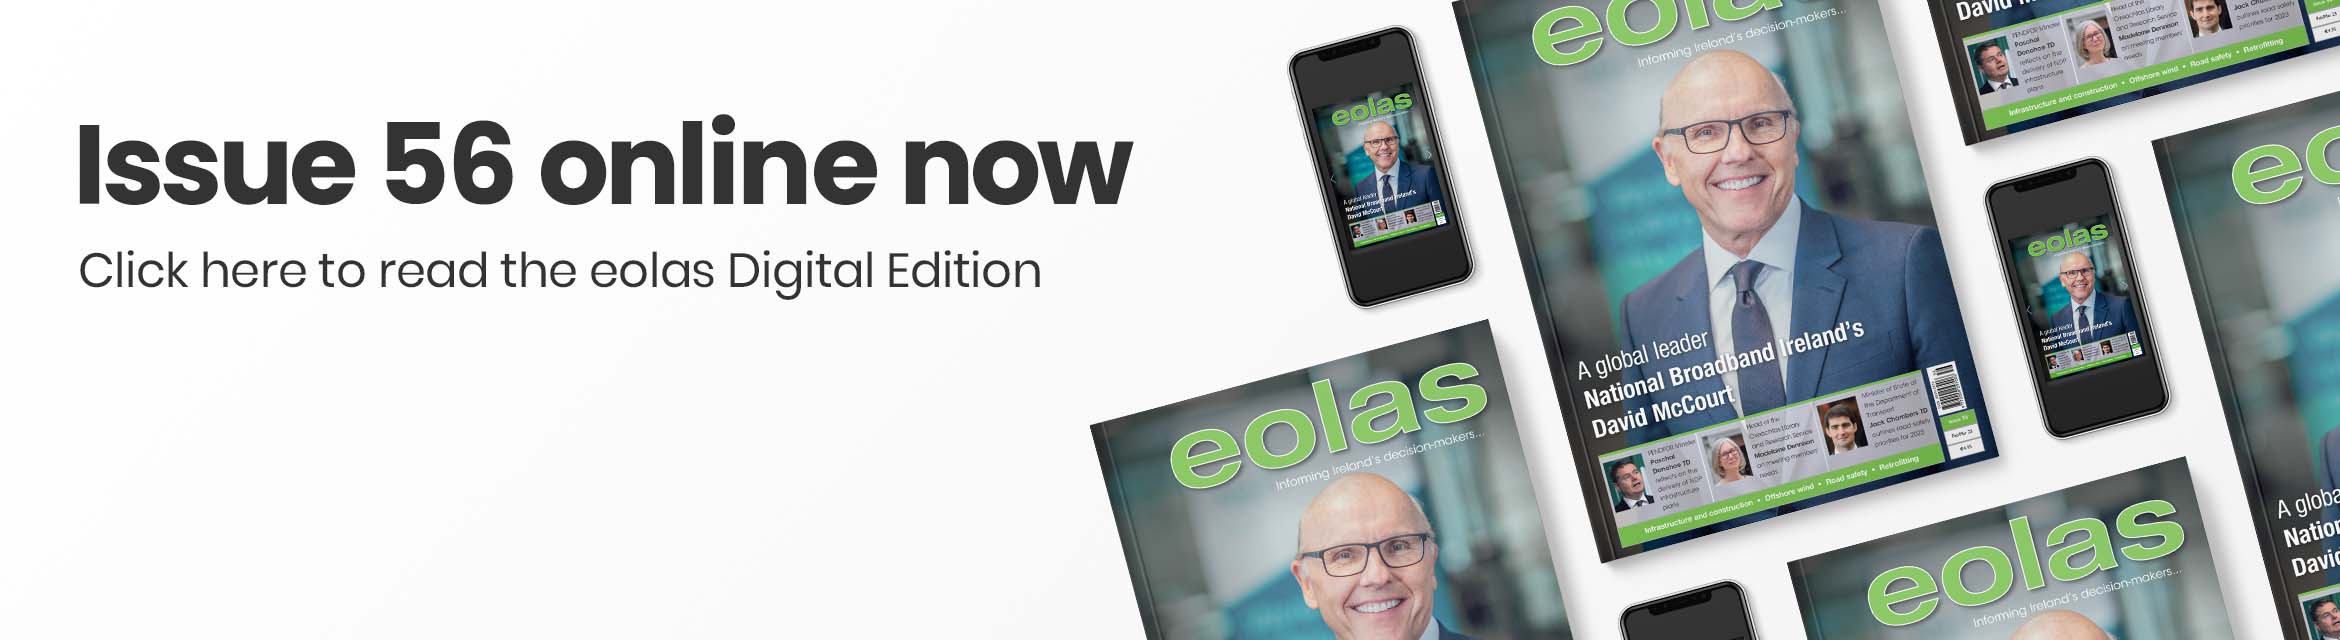 Issue 56 online now • Read the eolas Digital Edition